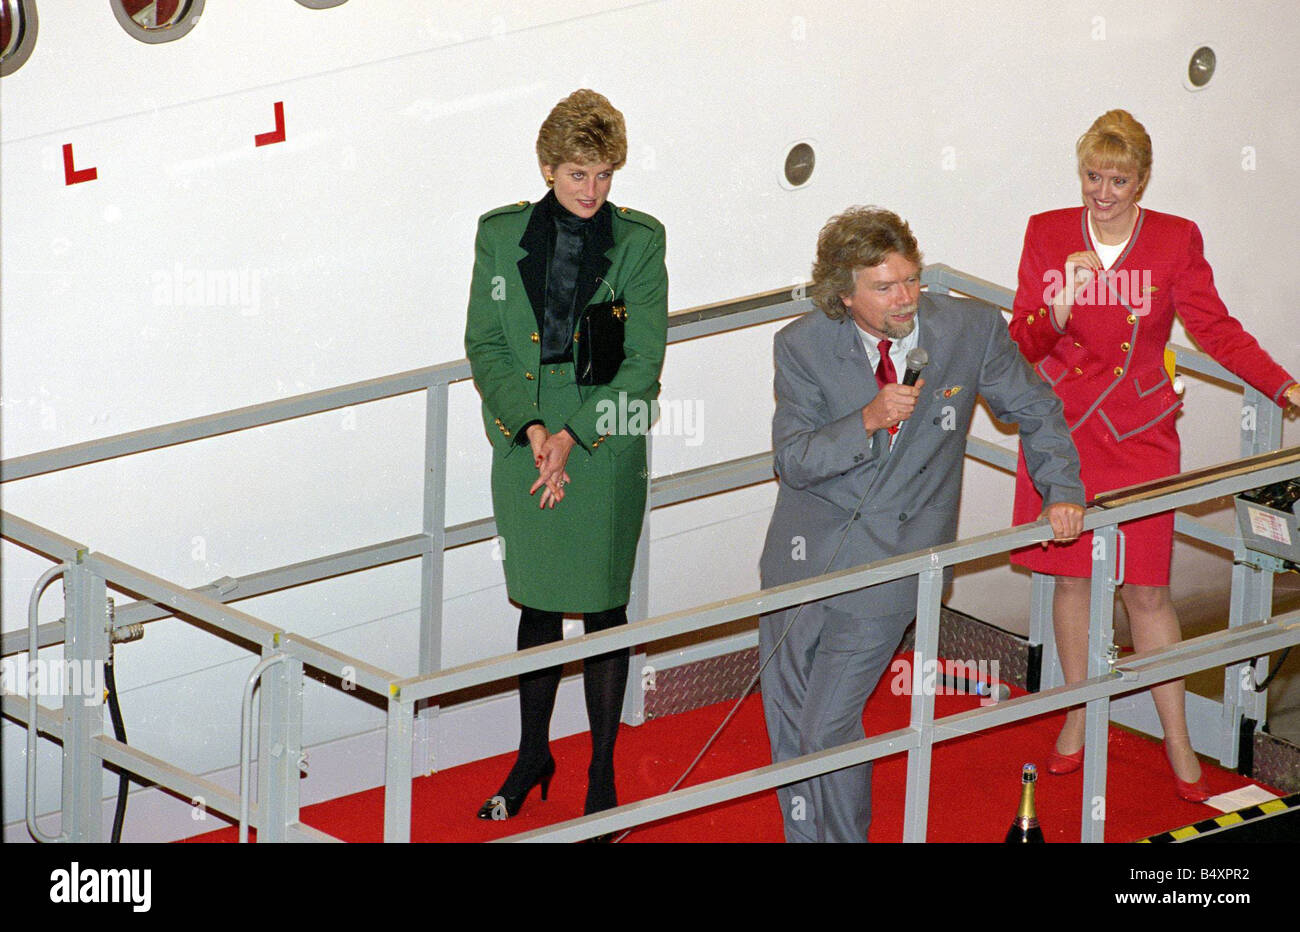 Princess Diana with Richard Branson December 1993 at Virgin Boat Launch Lady in Red green matching outfit standing on platform Stock Photo